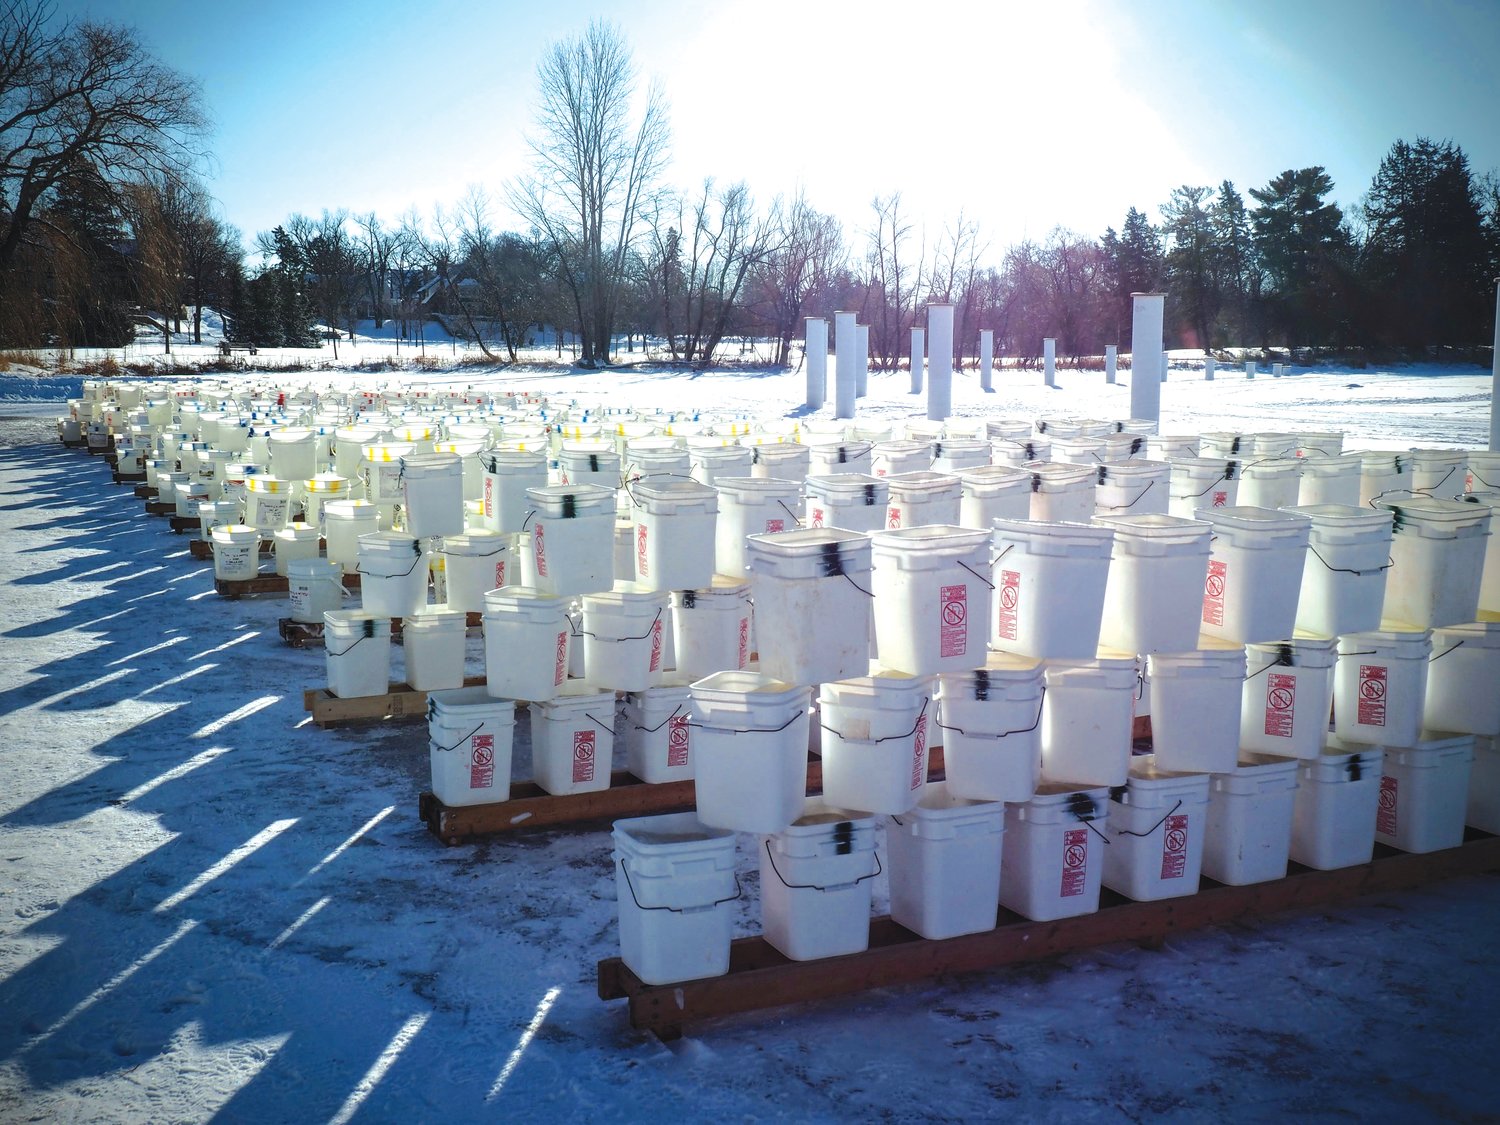 Volunteers fill buckets with ice from Lake of the Isles that will be used in the Luminary Loppet. (Photos submitted)